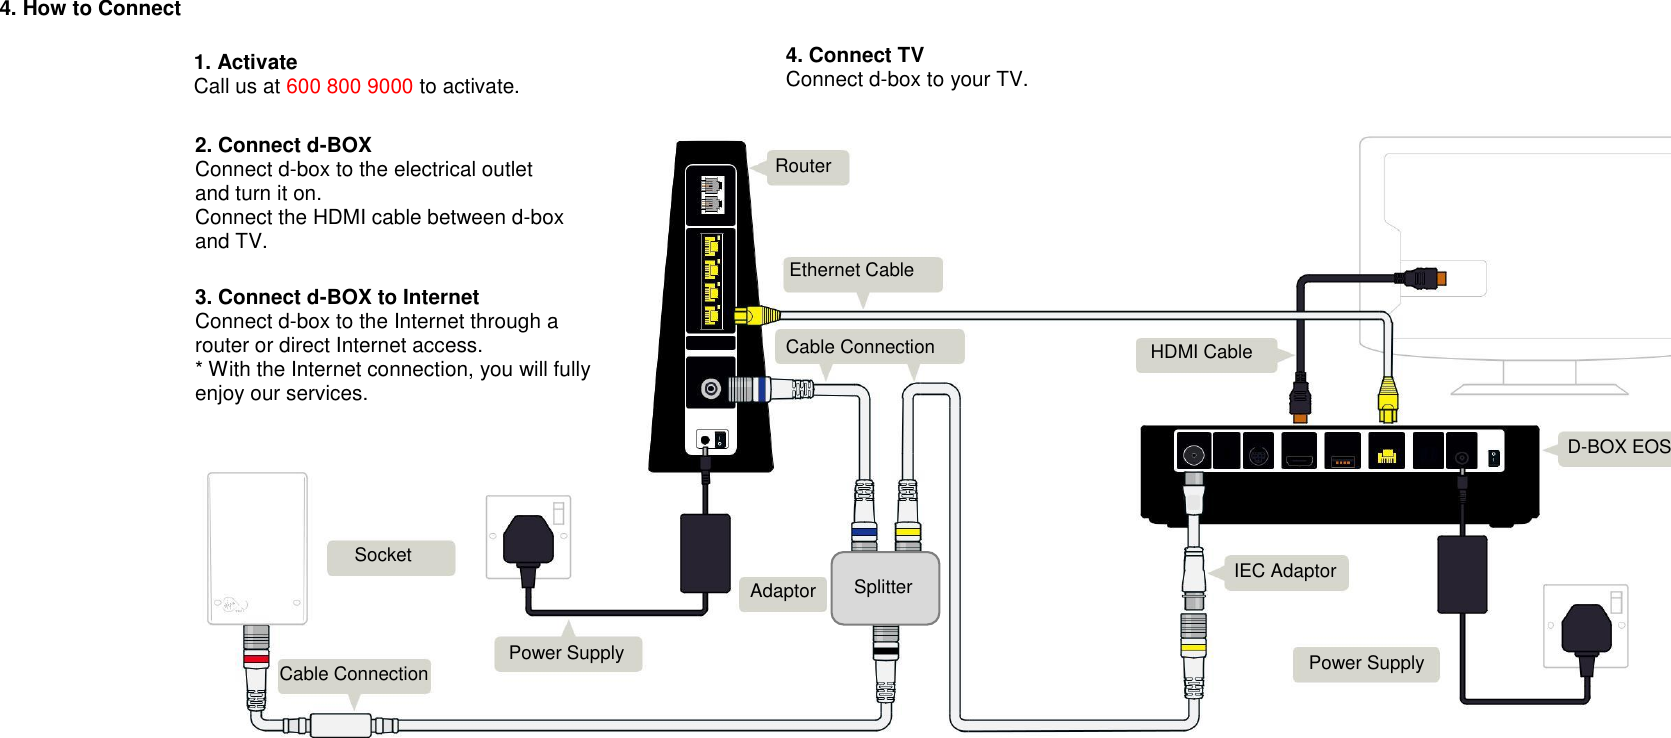 4. How to Connect   4. Socket Cable Connection  Power Supply Adaptor Router Ethernet Cable Cable Connection Power Supply D-BOX EOS HDMI Cable Splitter IEC Adaptor   1. Activate Call us at 600 800 9000 to activate.   2. Connect d-BOX  Connect d-box to the electrical outlet and turn it on.  Connect the HDMI cable between d-box and TV.   3. Connect d-BOX to Internet Connect d-box to the Internet through a router or direct Internet access.  * With the Internet connection, you will fully enjoy our services.   4. Connect TV Connect d-box to your TV. 